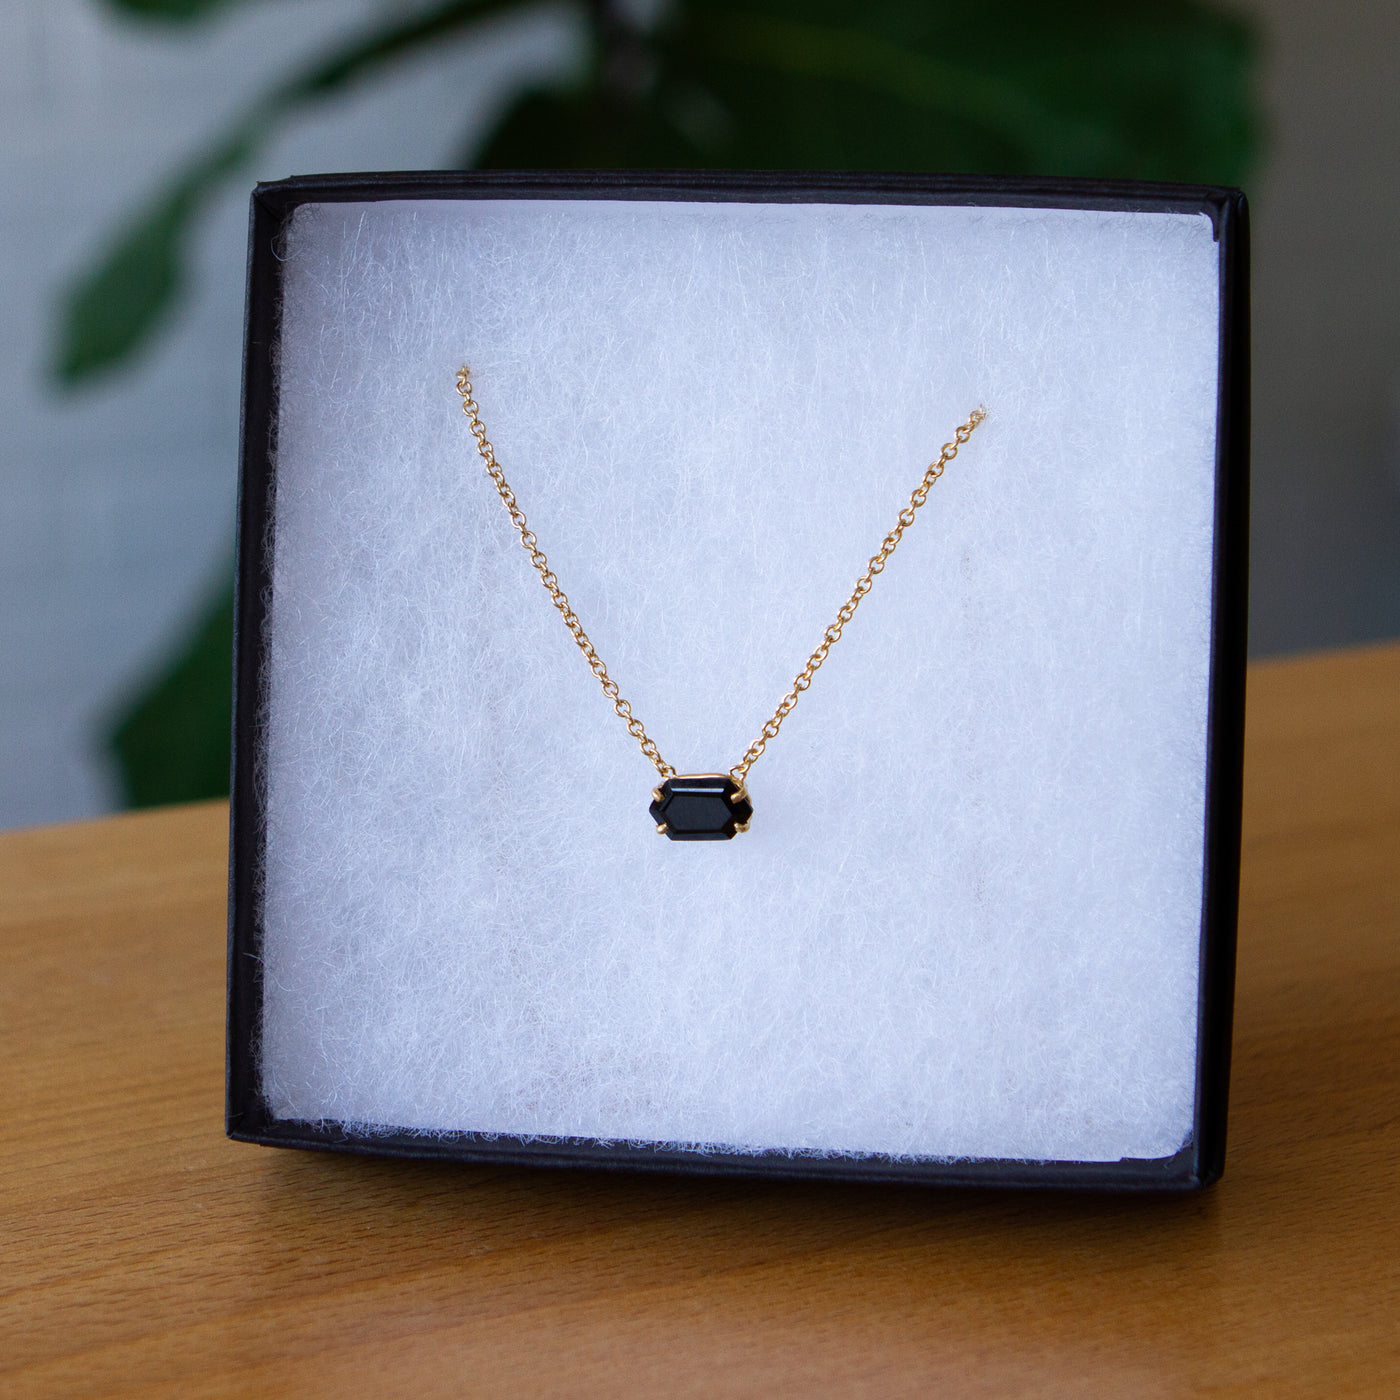 Emerson Black Garnet Necklace in Vermeil packaged in a jewelry box